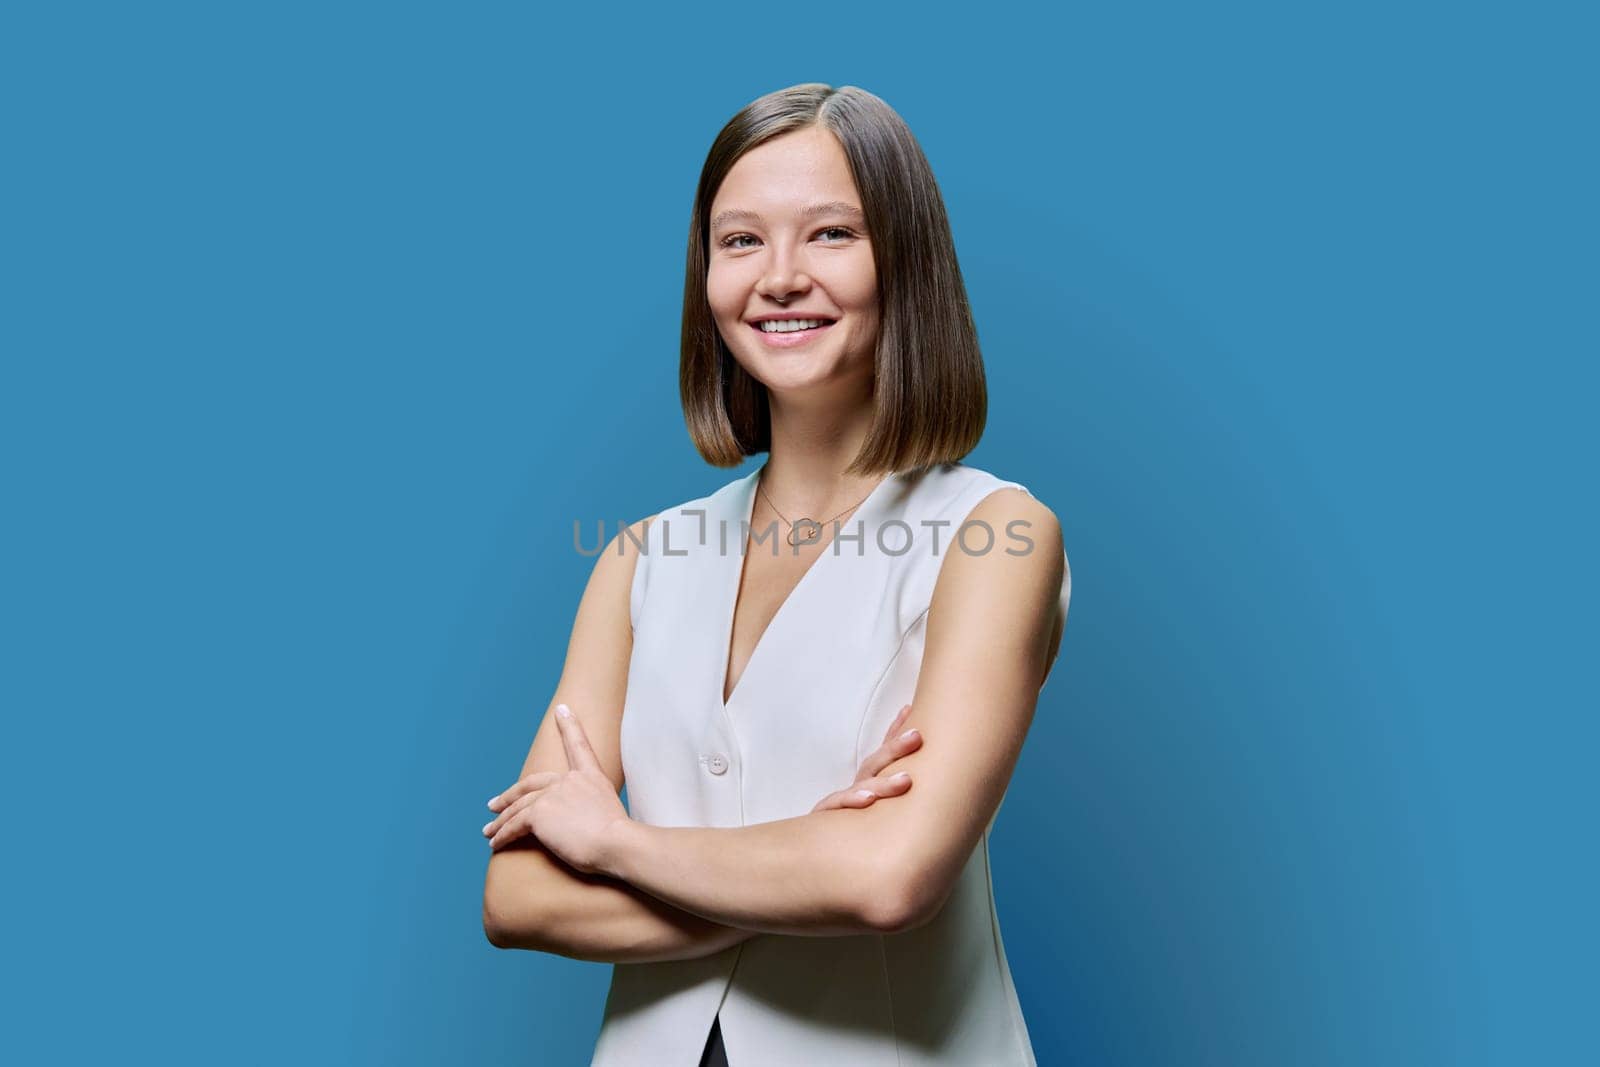 Portrait of young confident woman on blue studio background. Successful fashionable female with crossed arms looking at camera. Business, work, services, education, fashion beauty professions